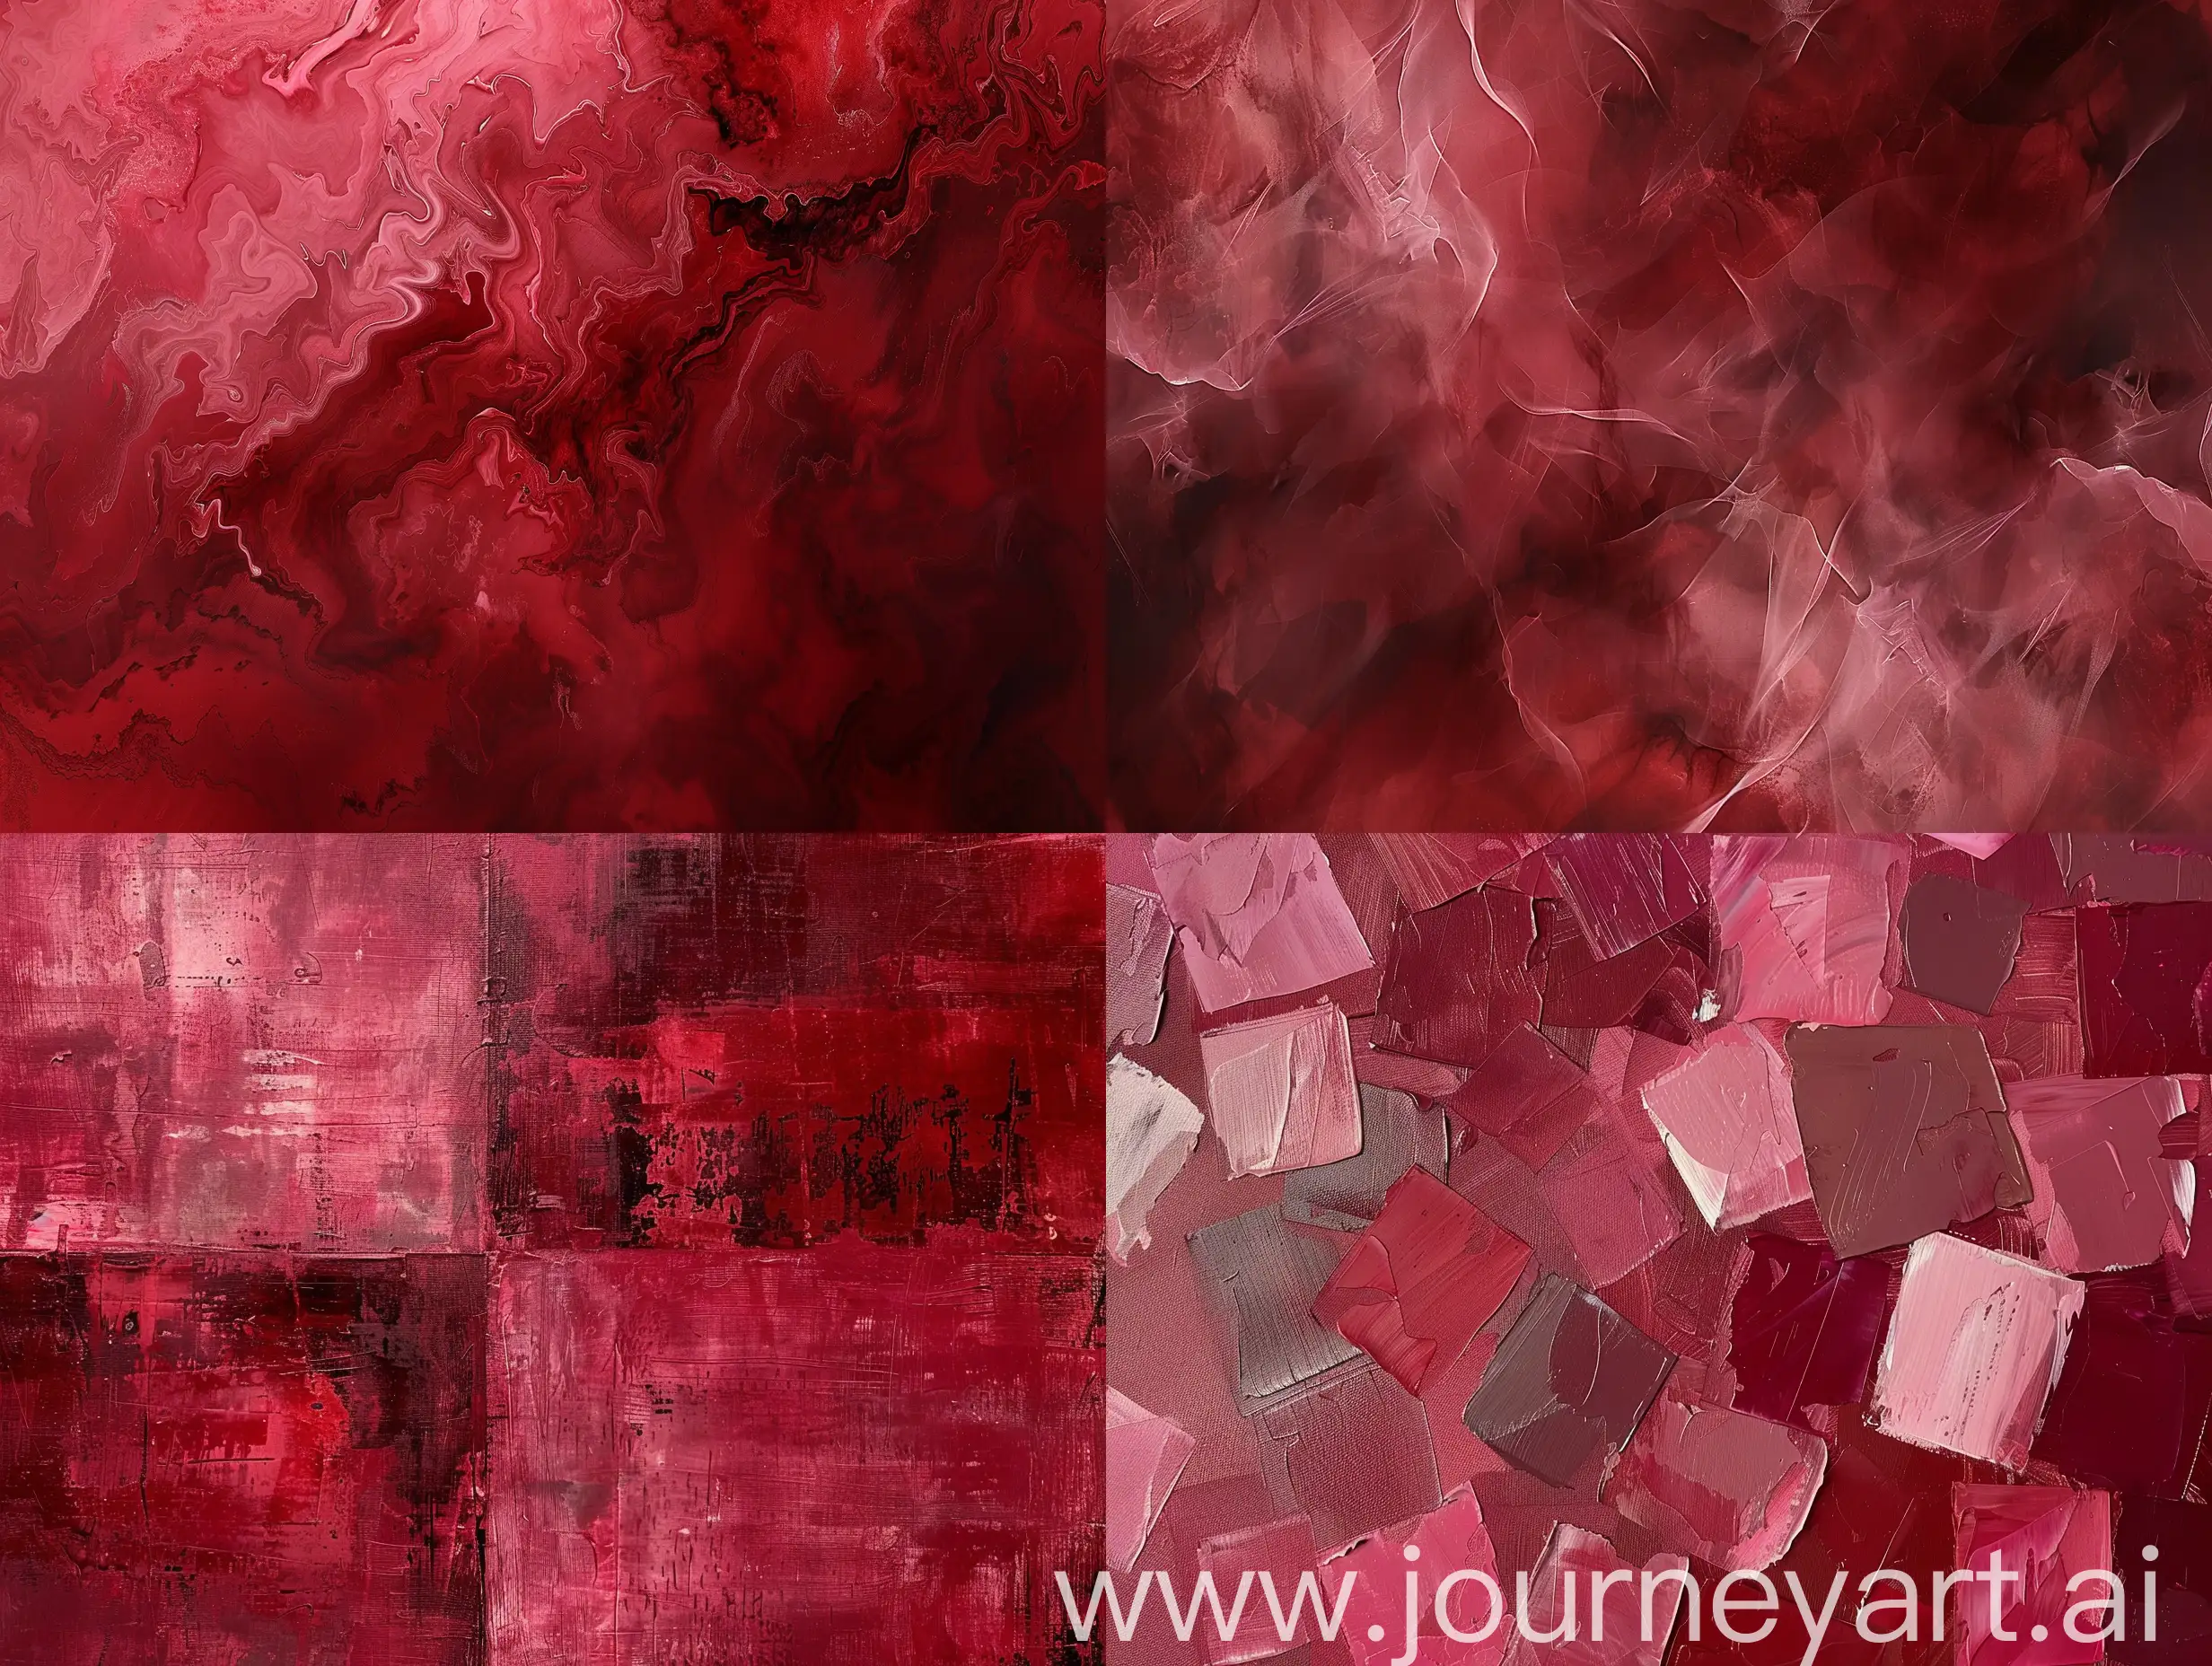 Ethereal-Exploration-Captivating-Soft-Dark-Red-Abstract-Masterpiece